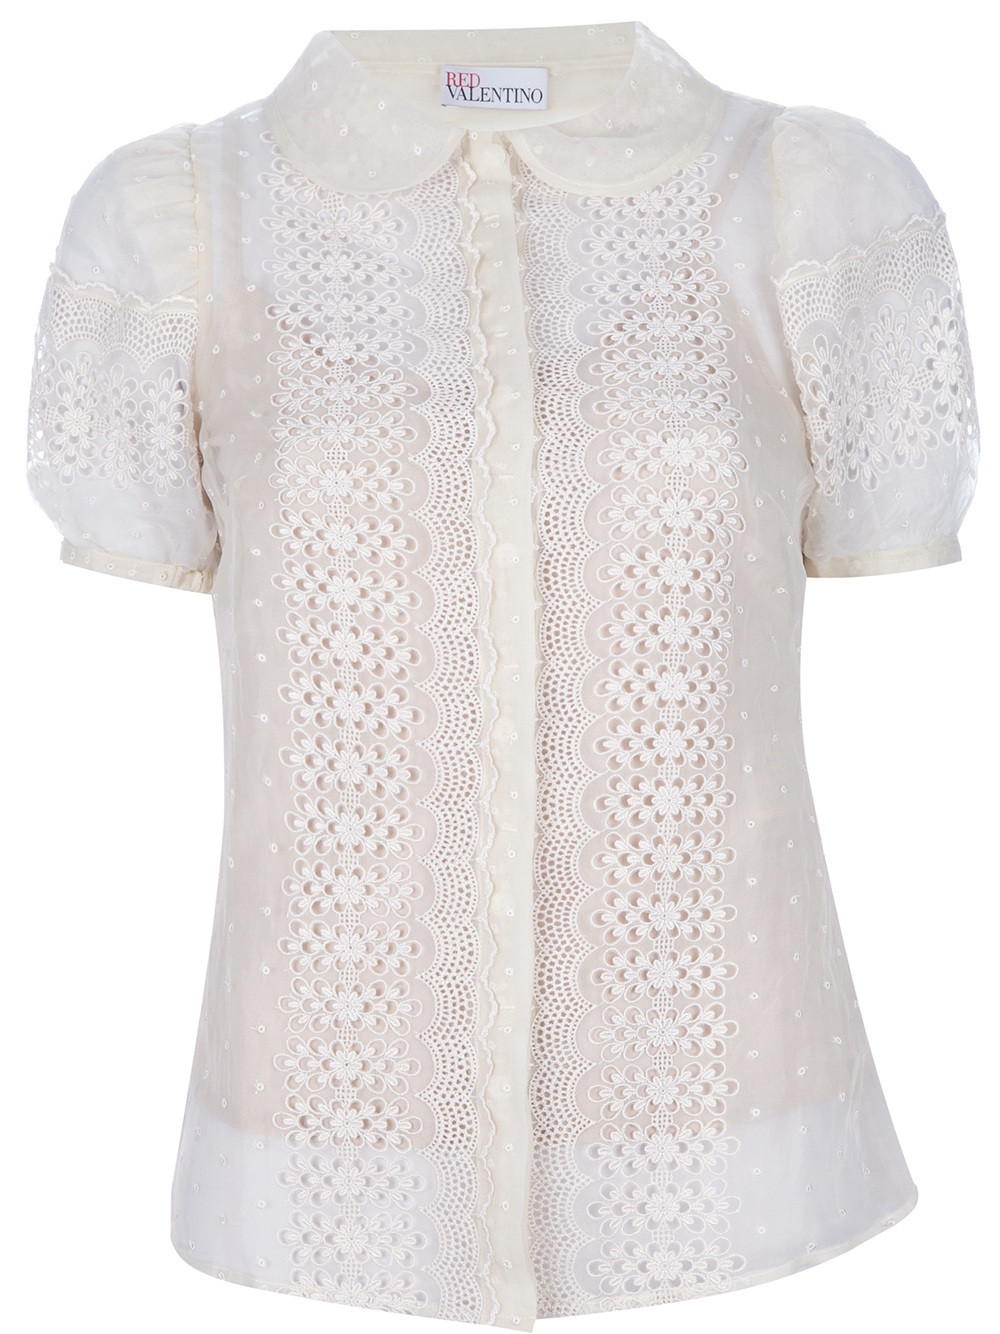 RED Valentino Lace Crochet Blouse in White - Lyst